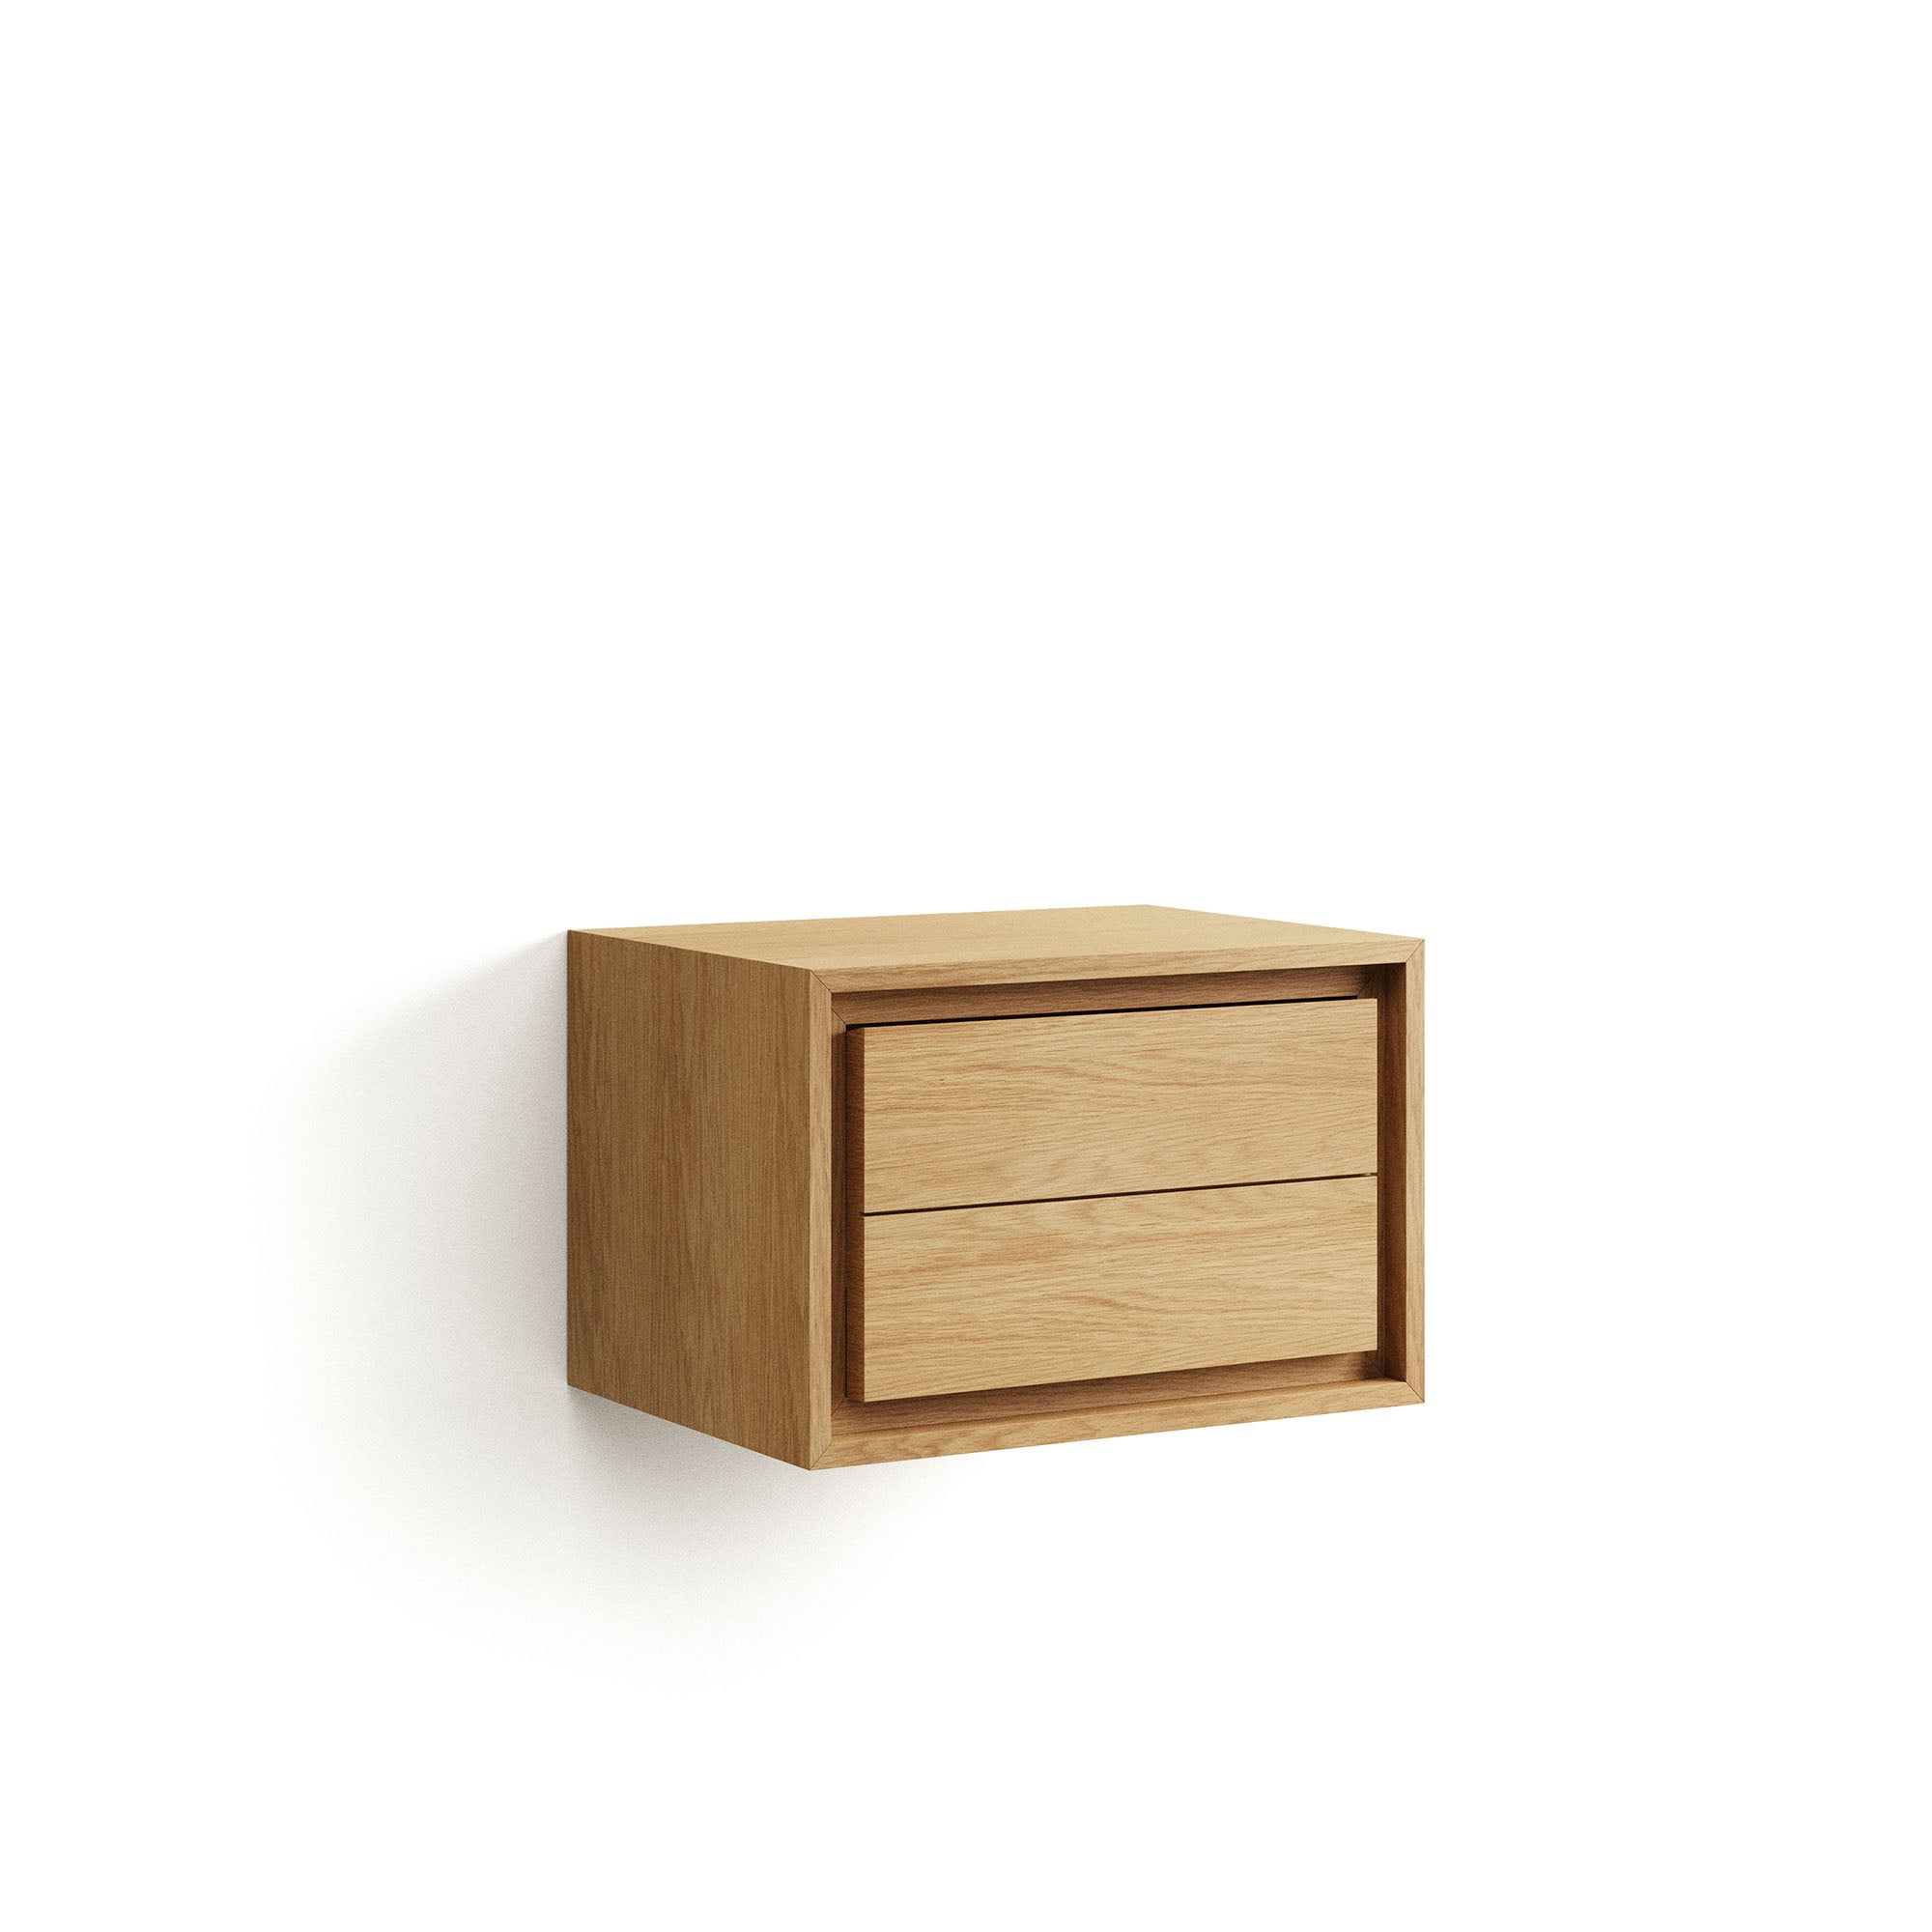 Kenta bathroom furniture in solid teak wood with a natural finish,  60 x 45 cm